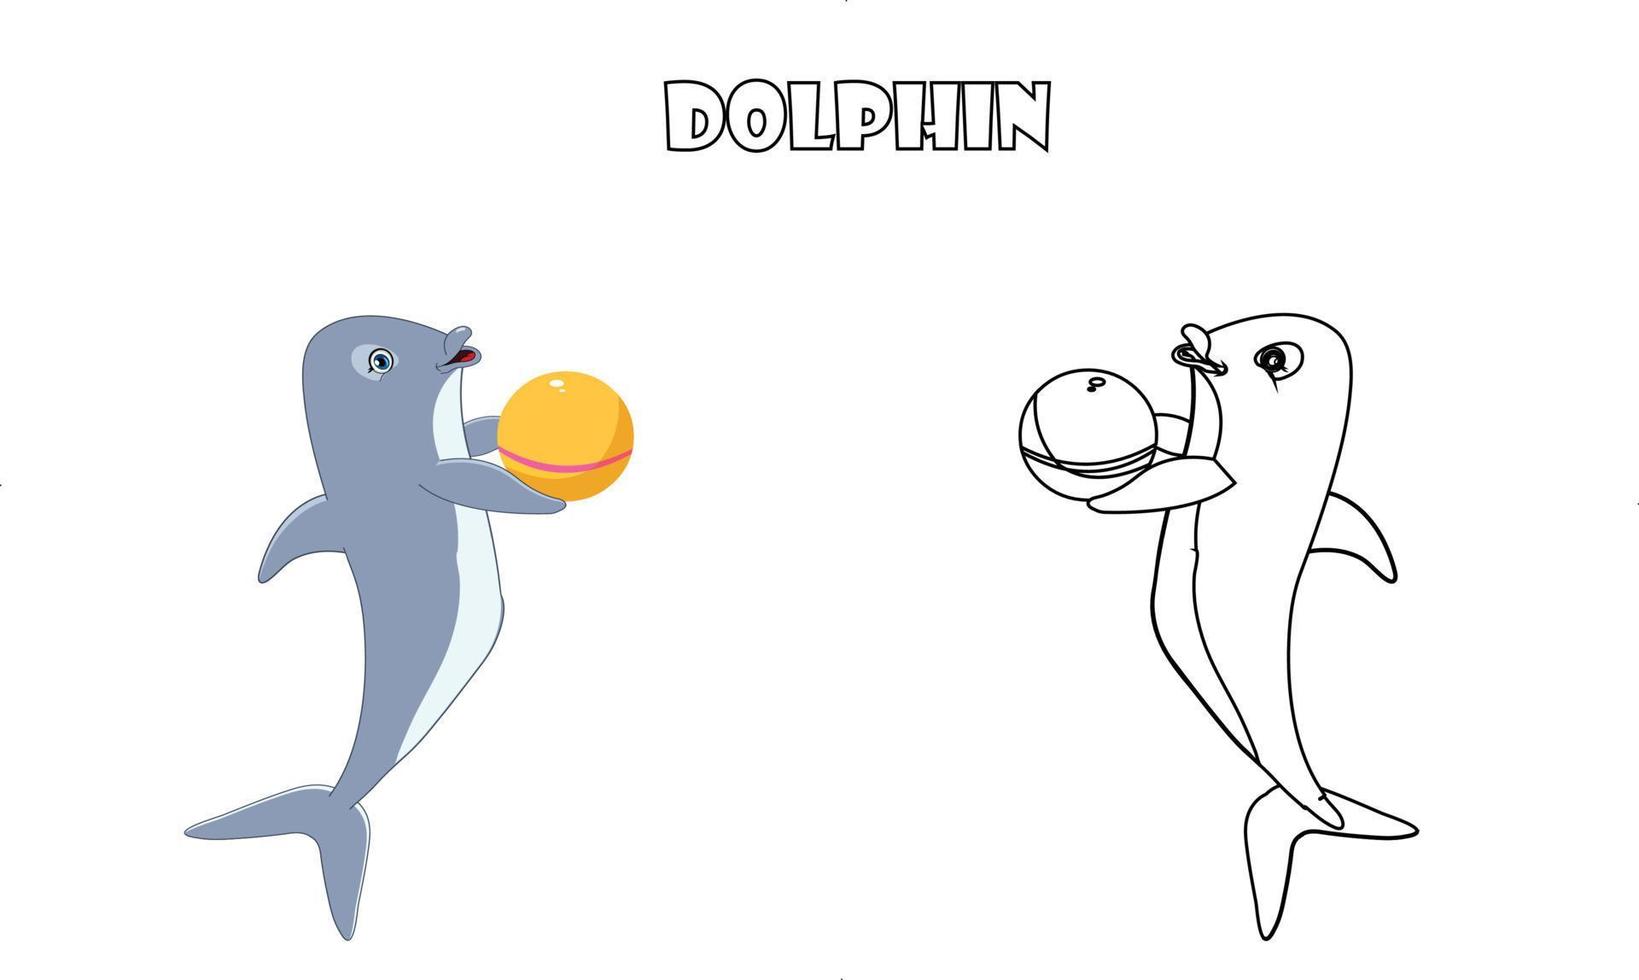 Cute dolphin animal line art color less image vector illustration, Children's pre school drawing page.